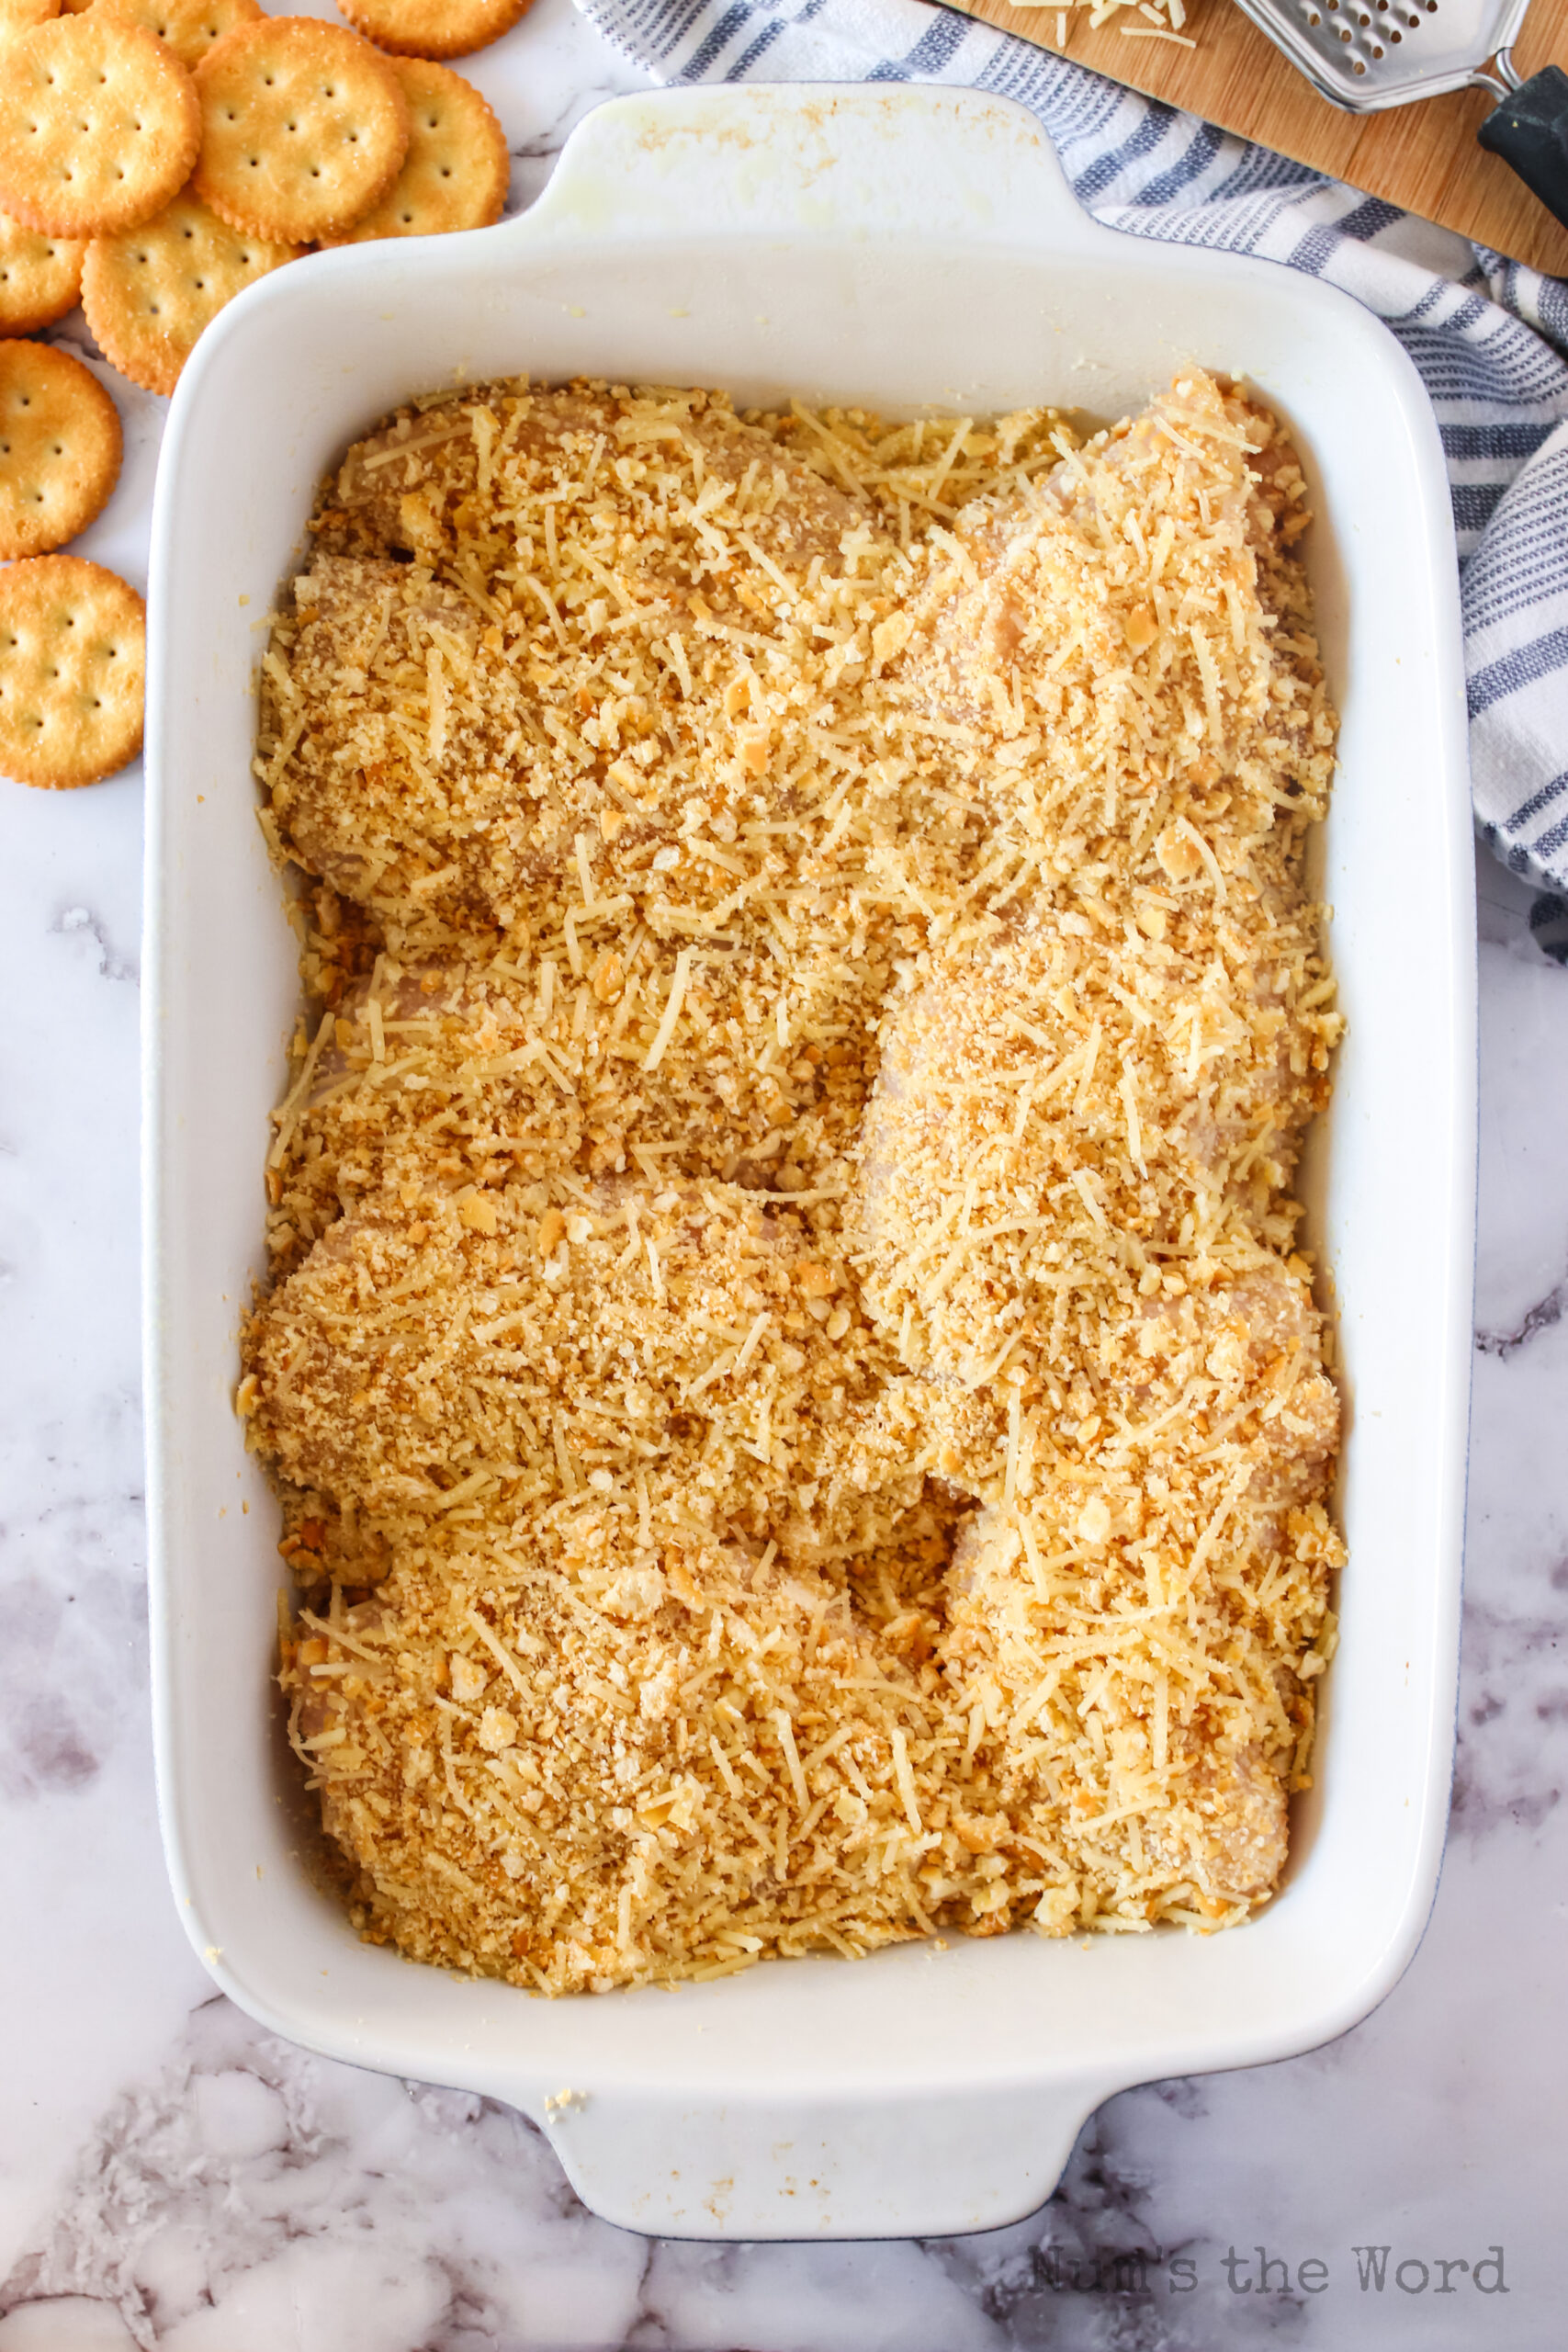 8 pieces of chicken covered in ritz crackers and cheese and put into casserole dish